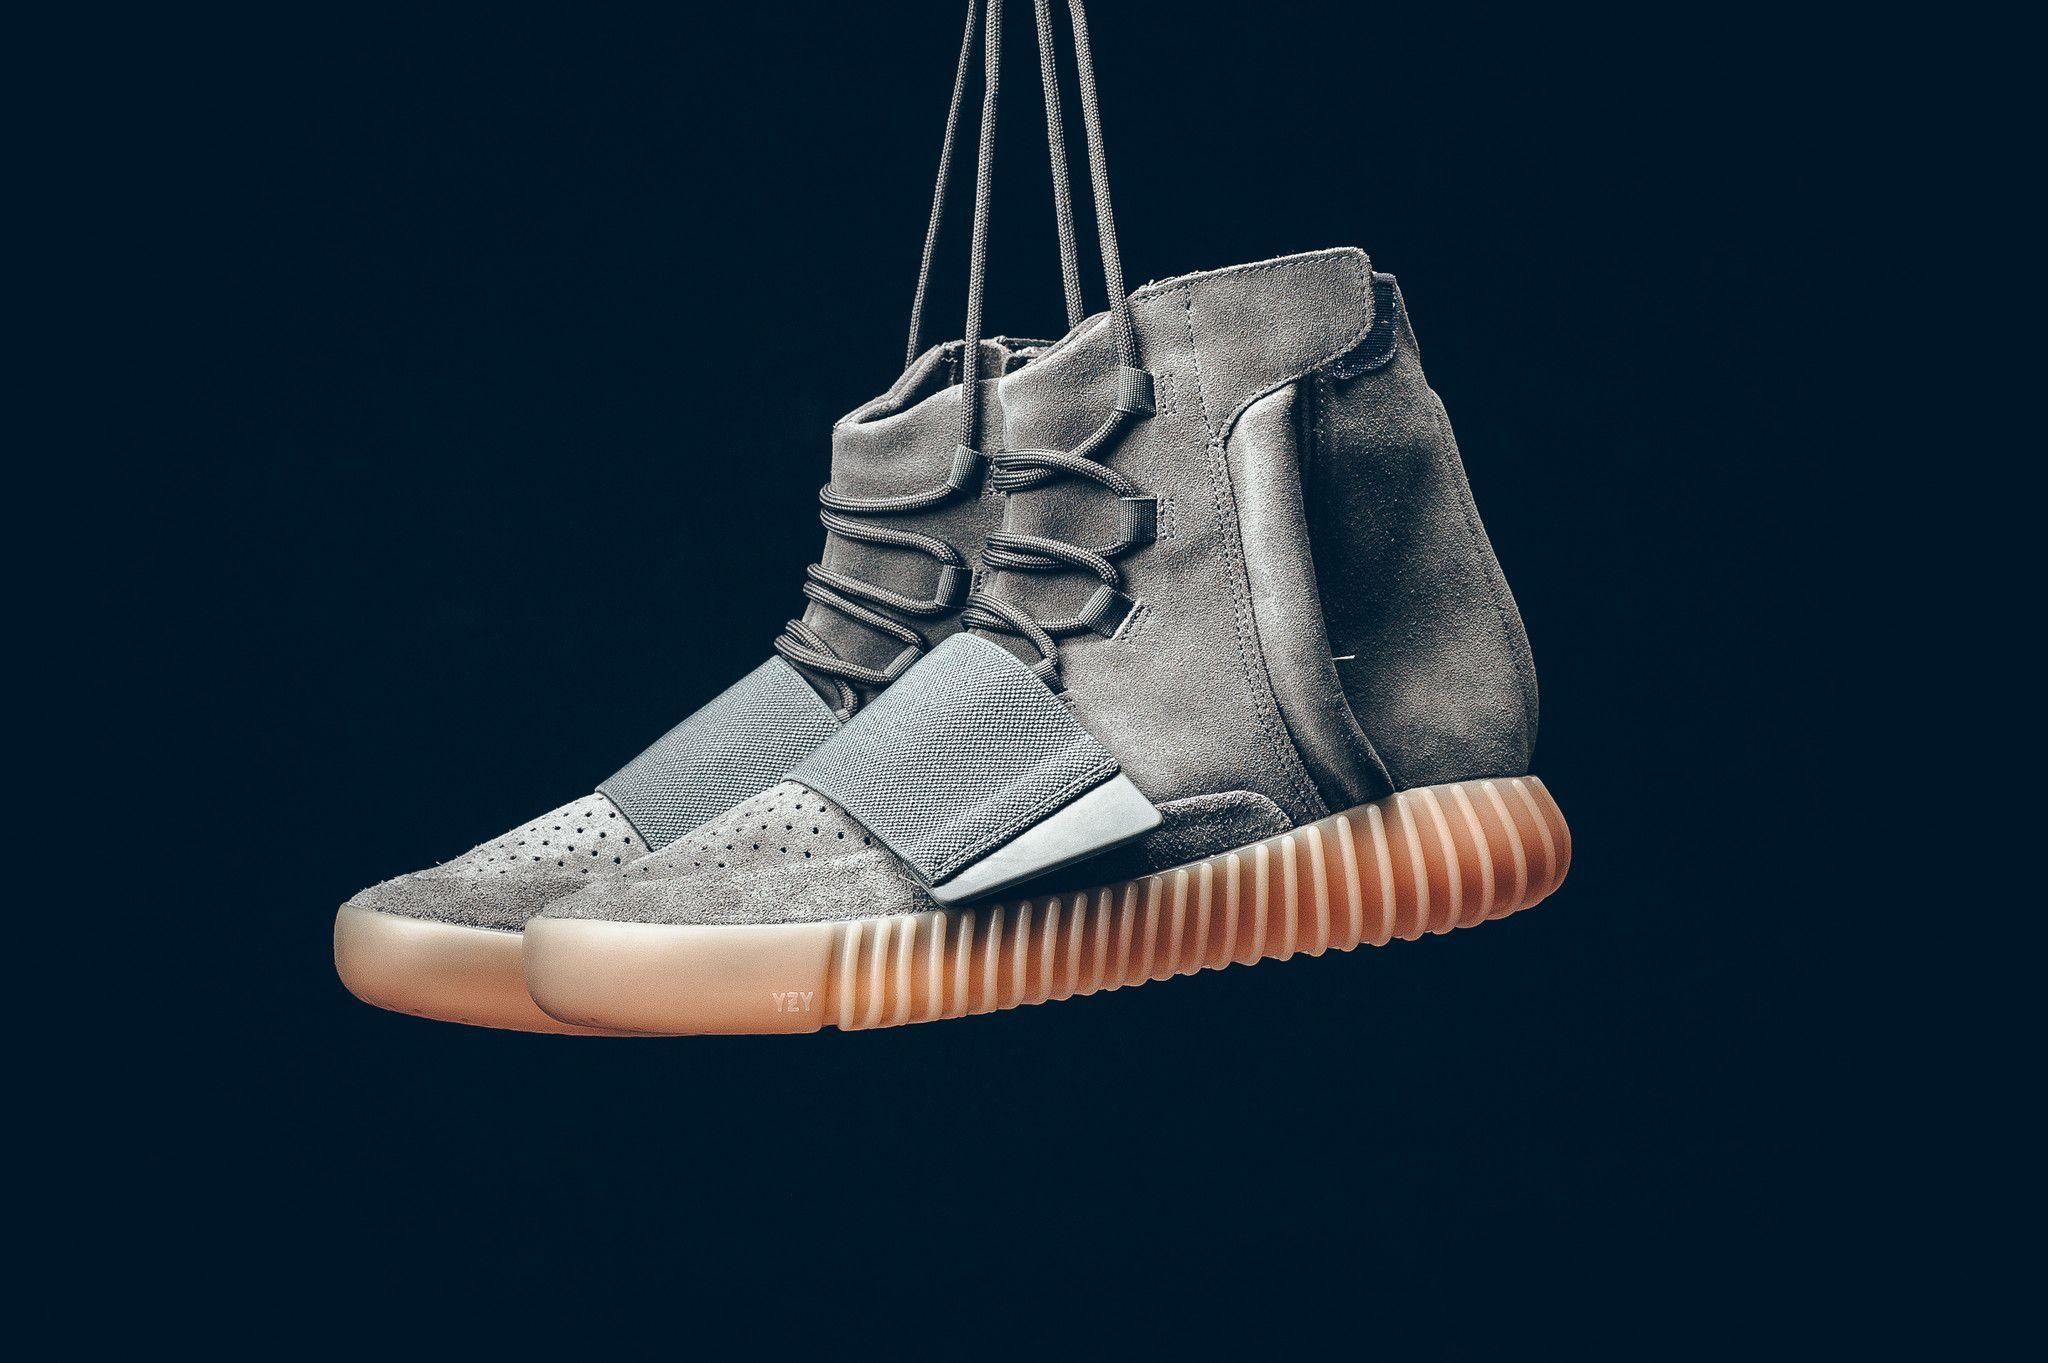 Yeezy Boost 750s Are Basically Impossible to Get, But Here Are